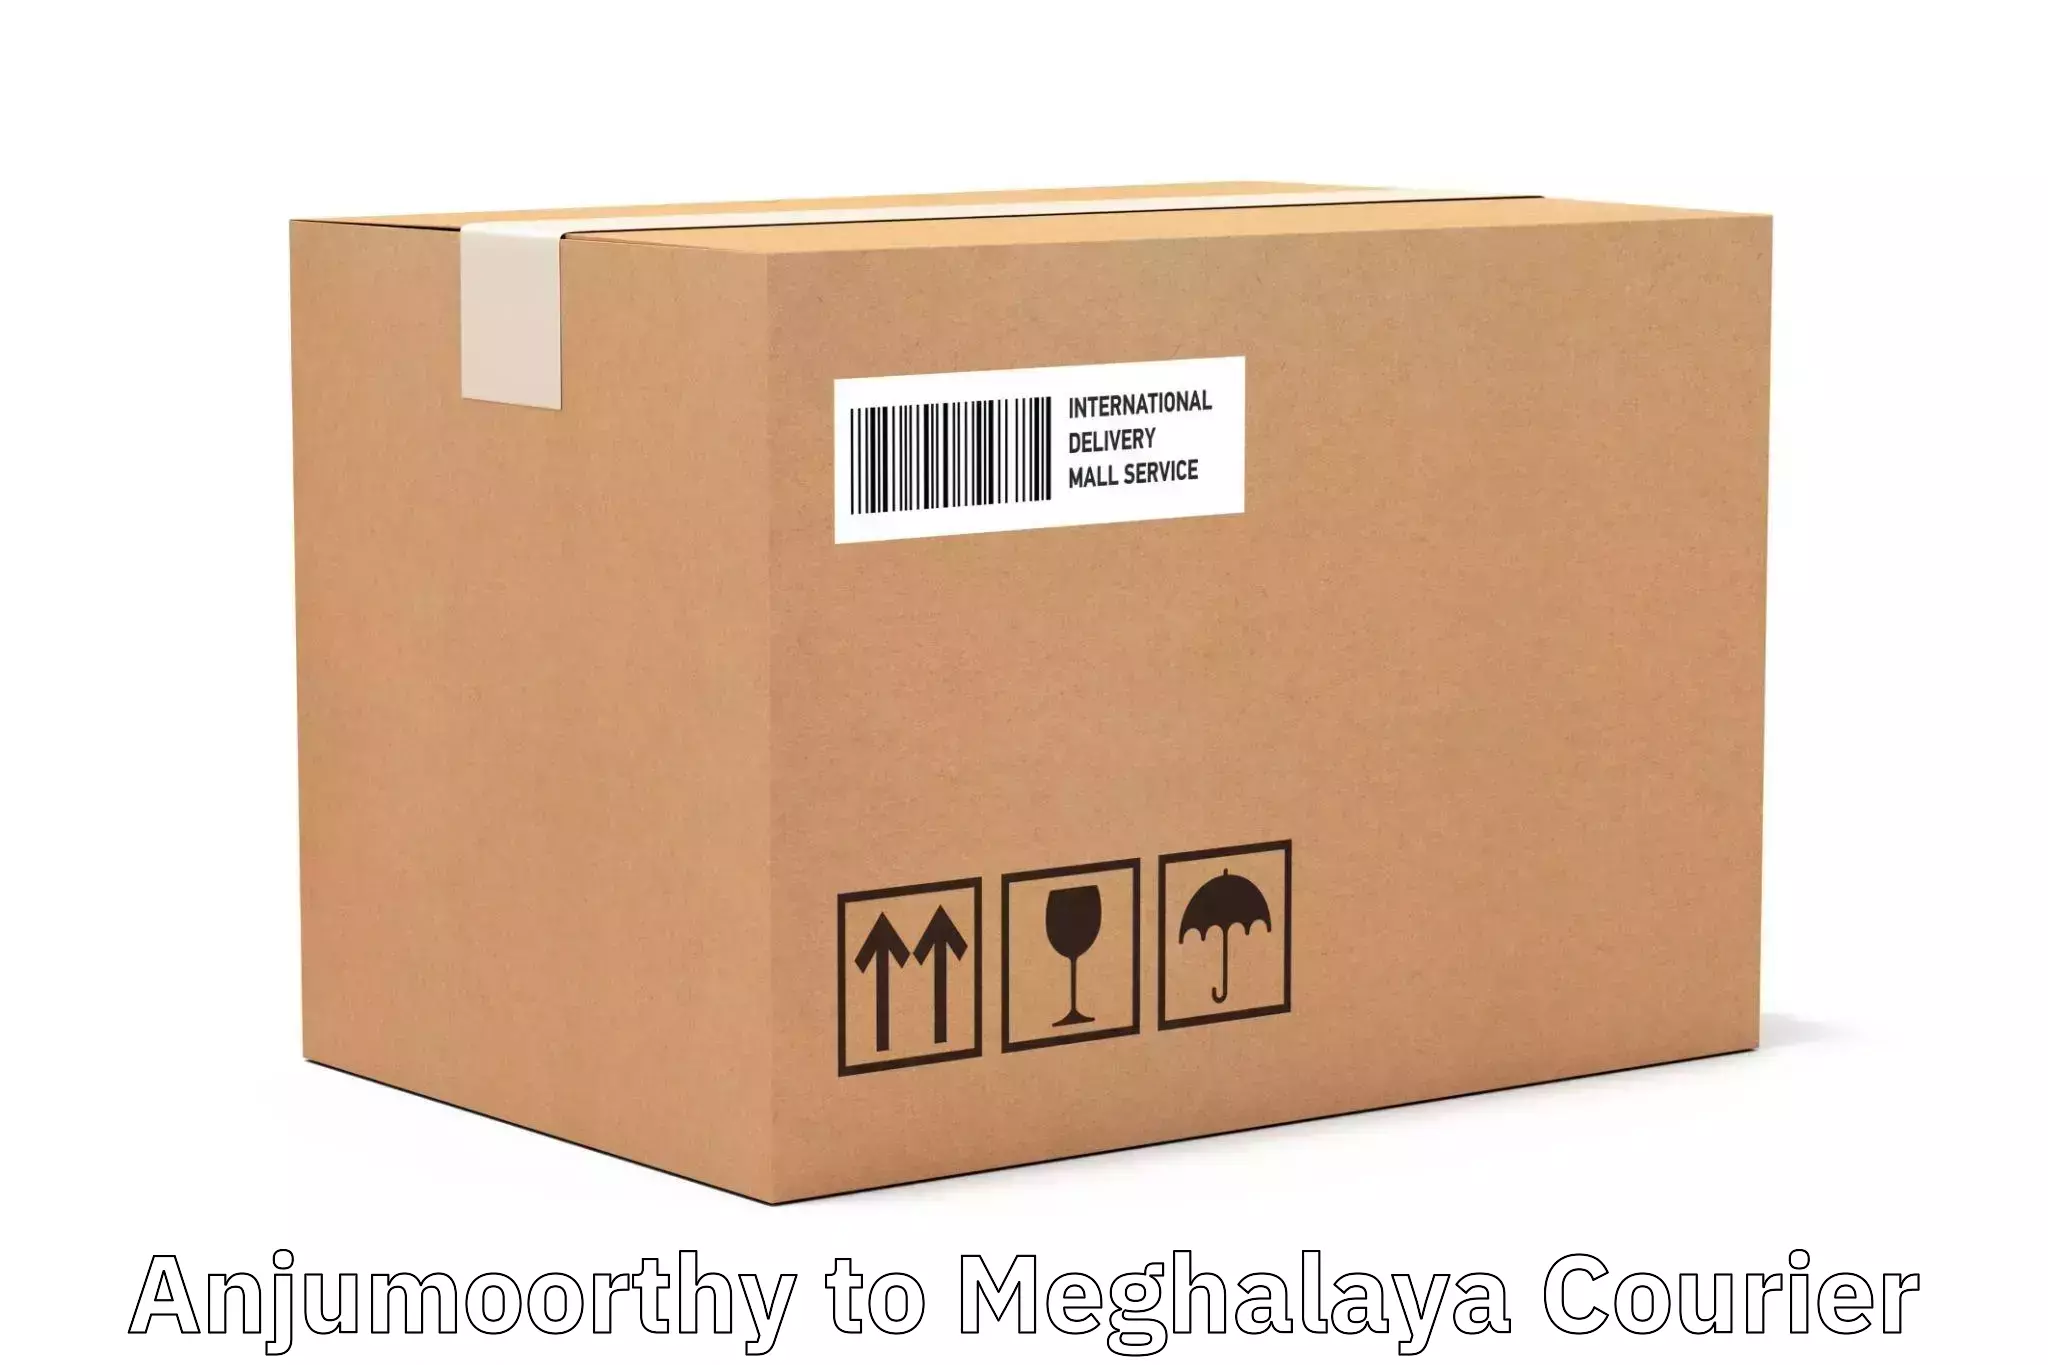 State-of-the-art courier technology Anjumoorthy to Jaintia Hills